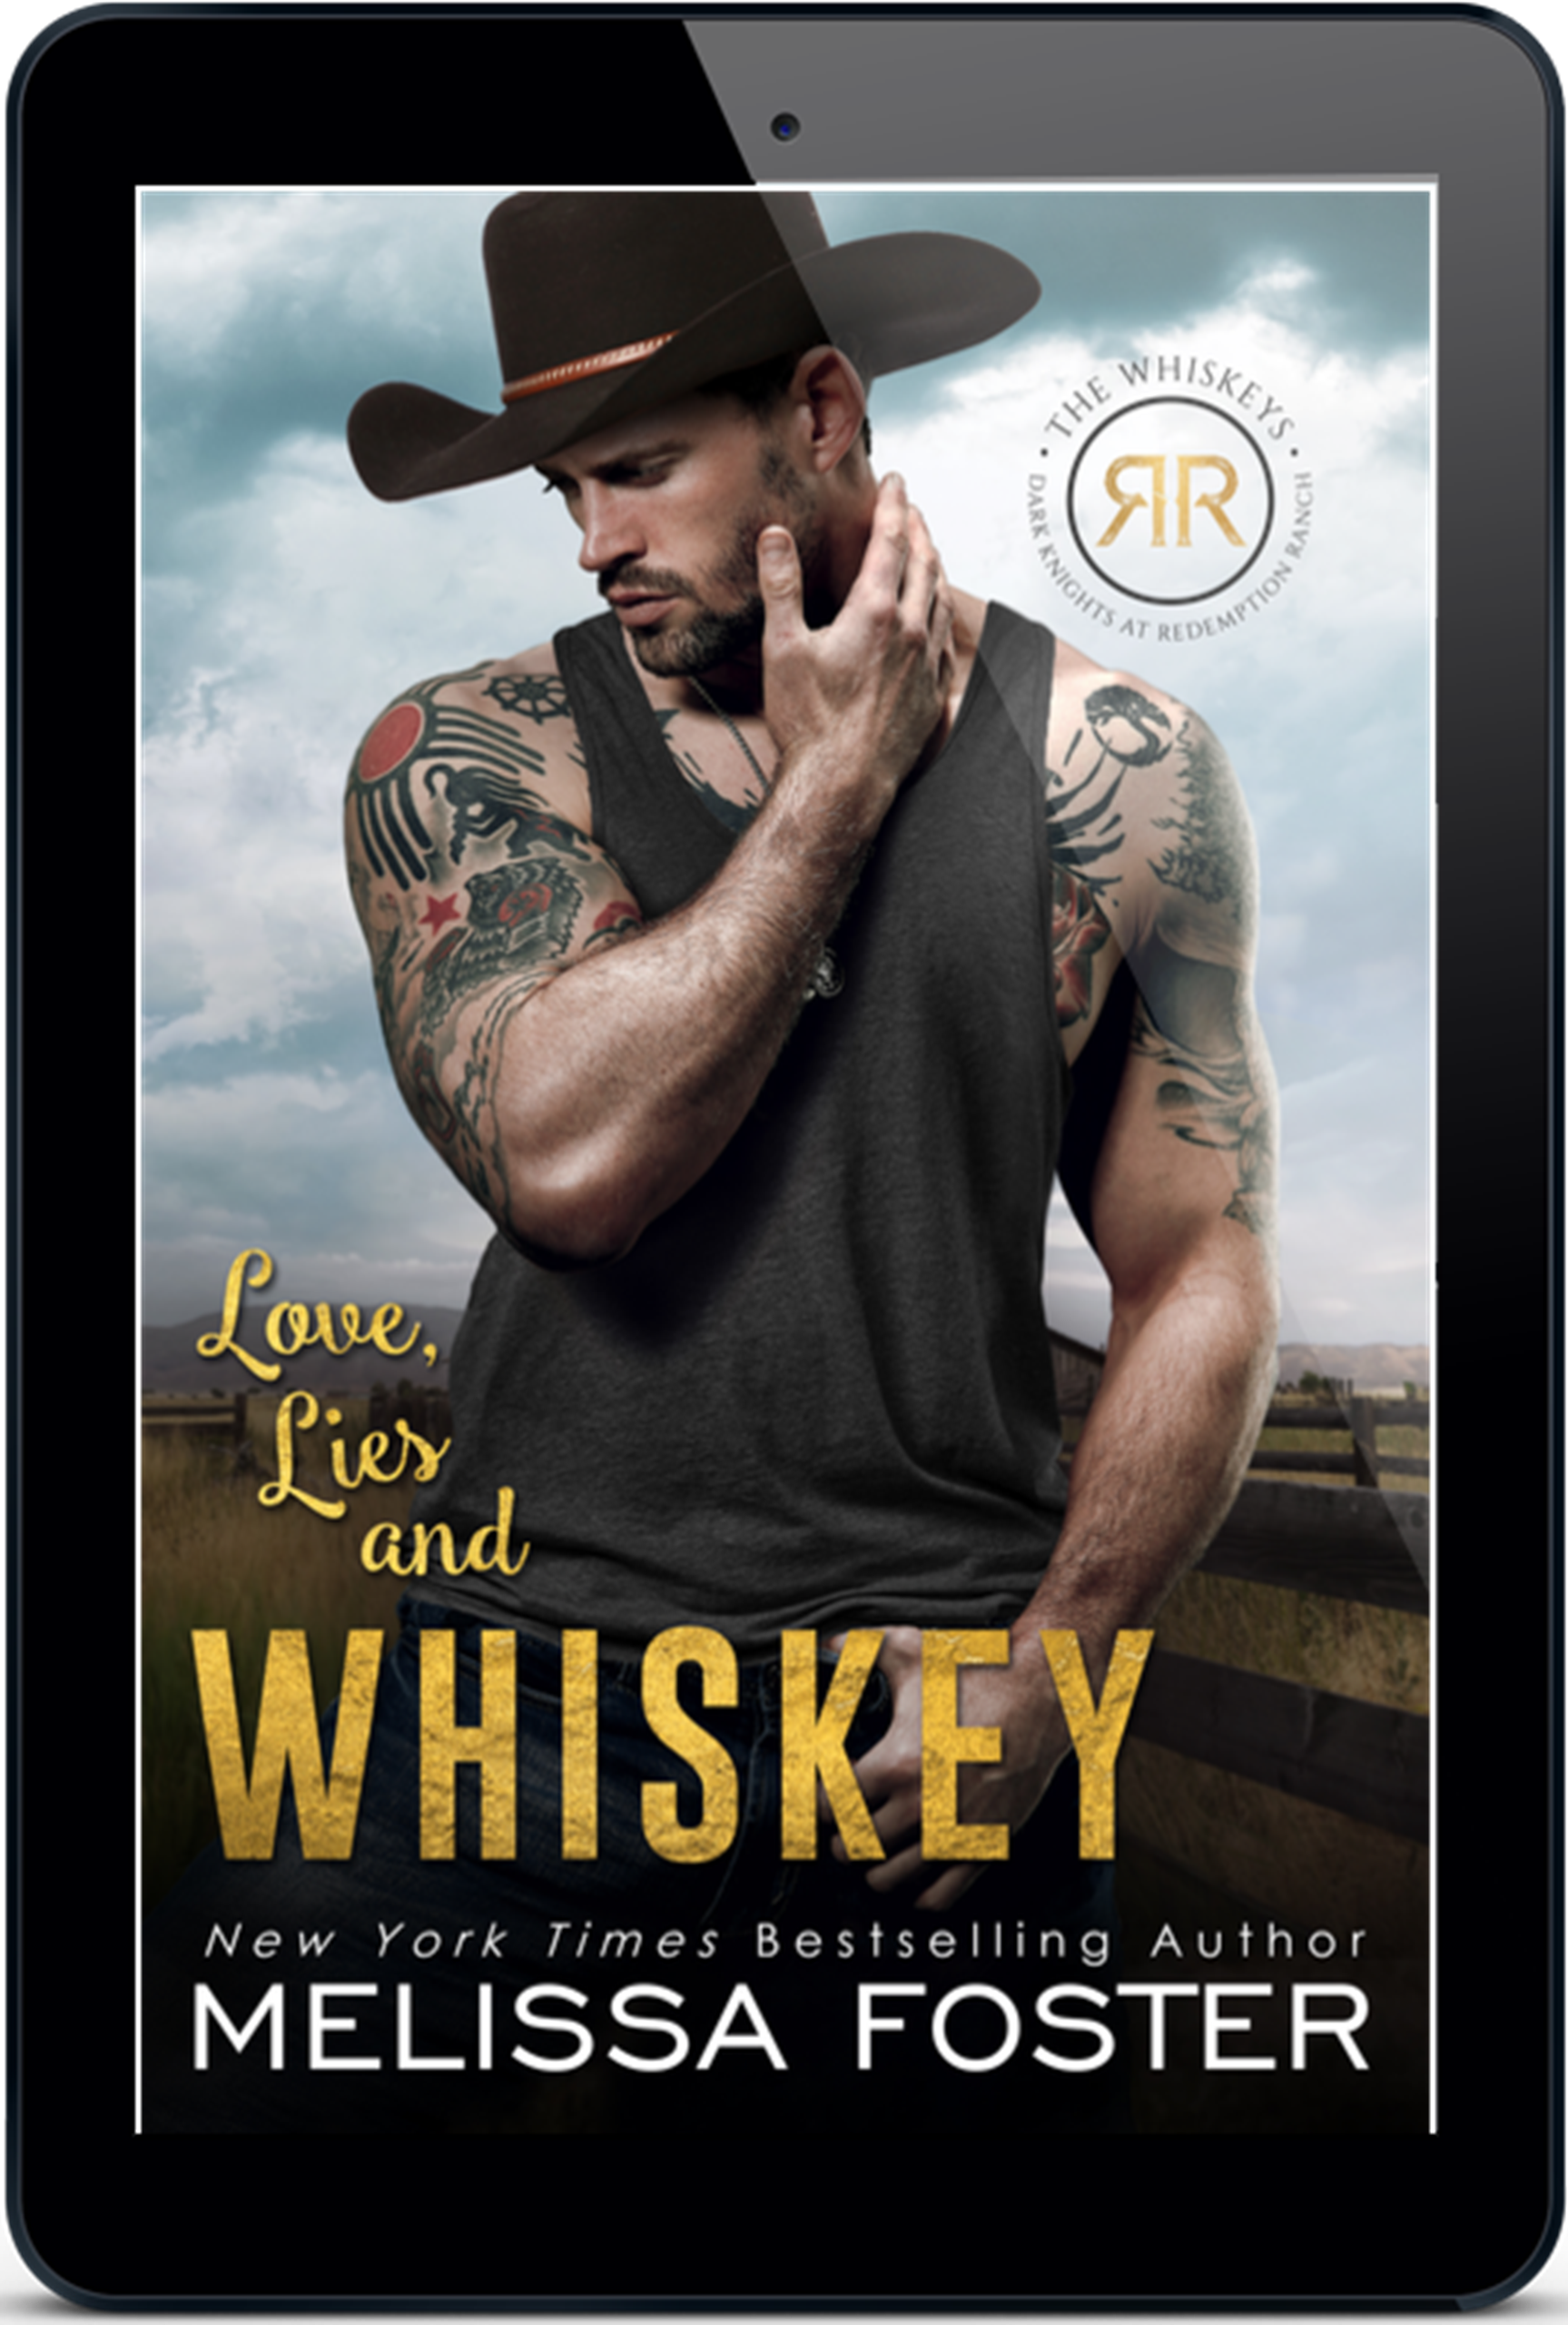 Love, Lies & Whiskey by Melissa Foster